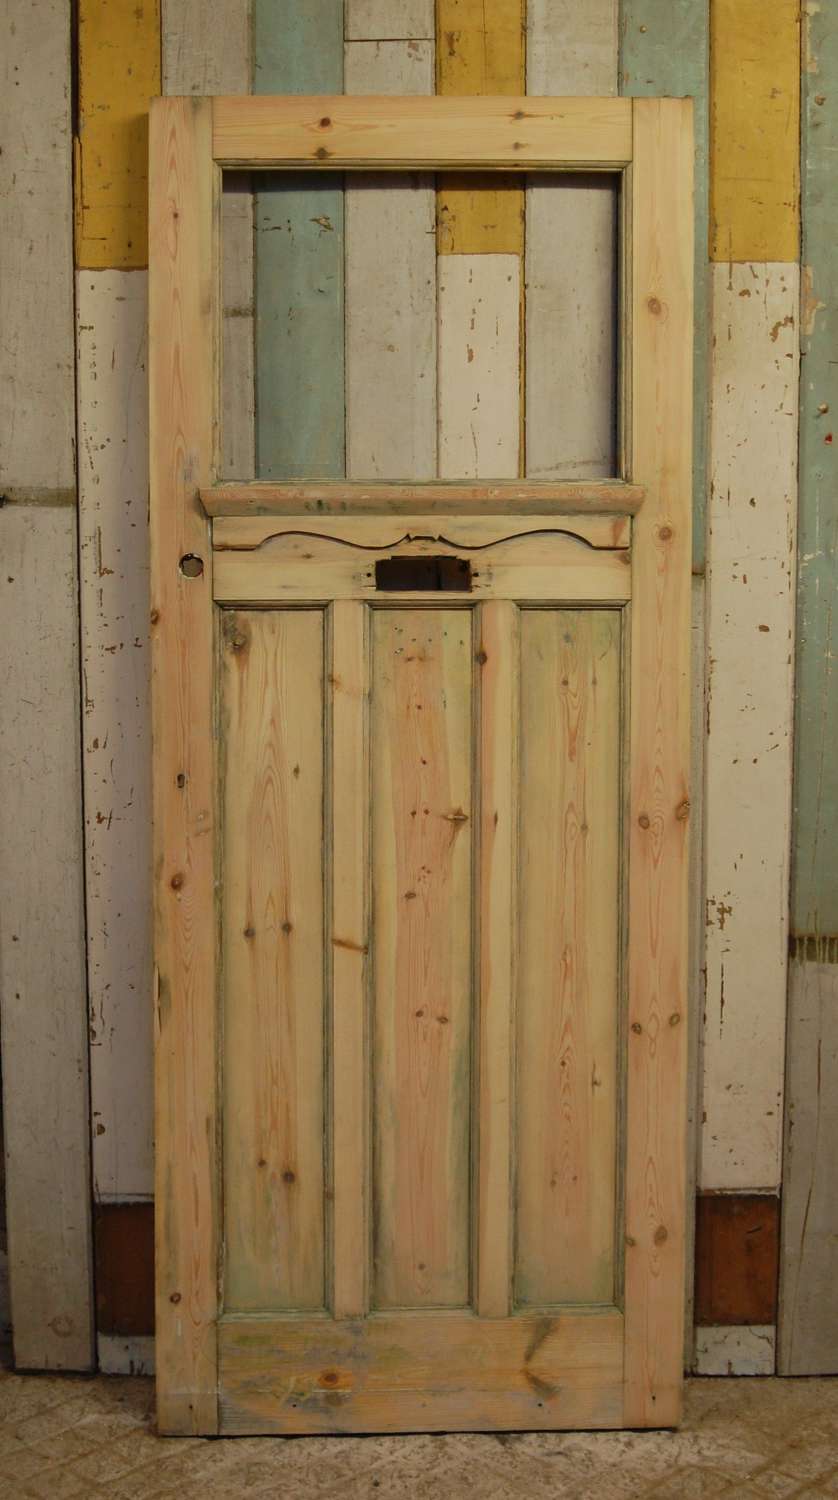 DE0586 EDWARDIAN STRIPPED PINE FRONT DOOR WITH PANEL FOR GLAZING